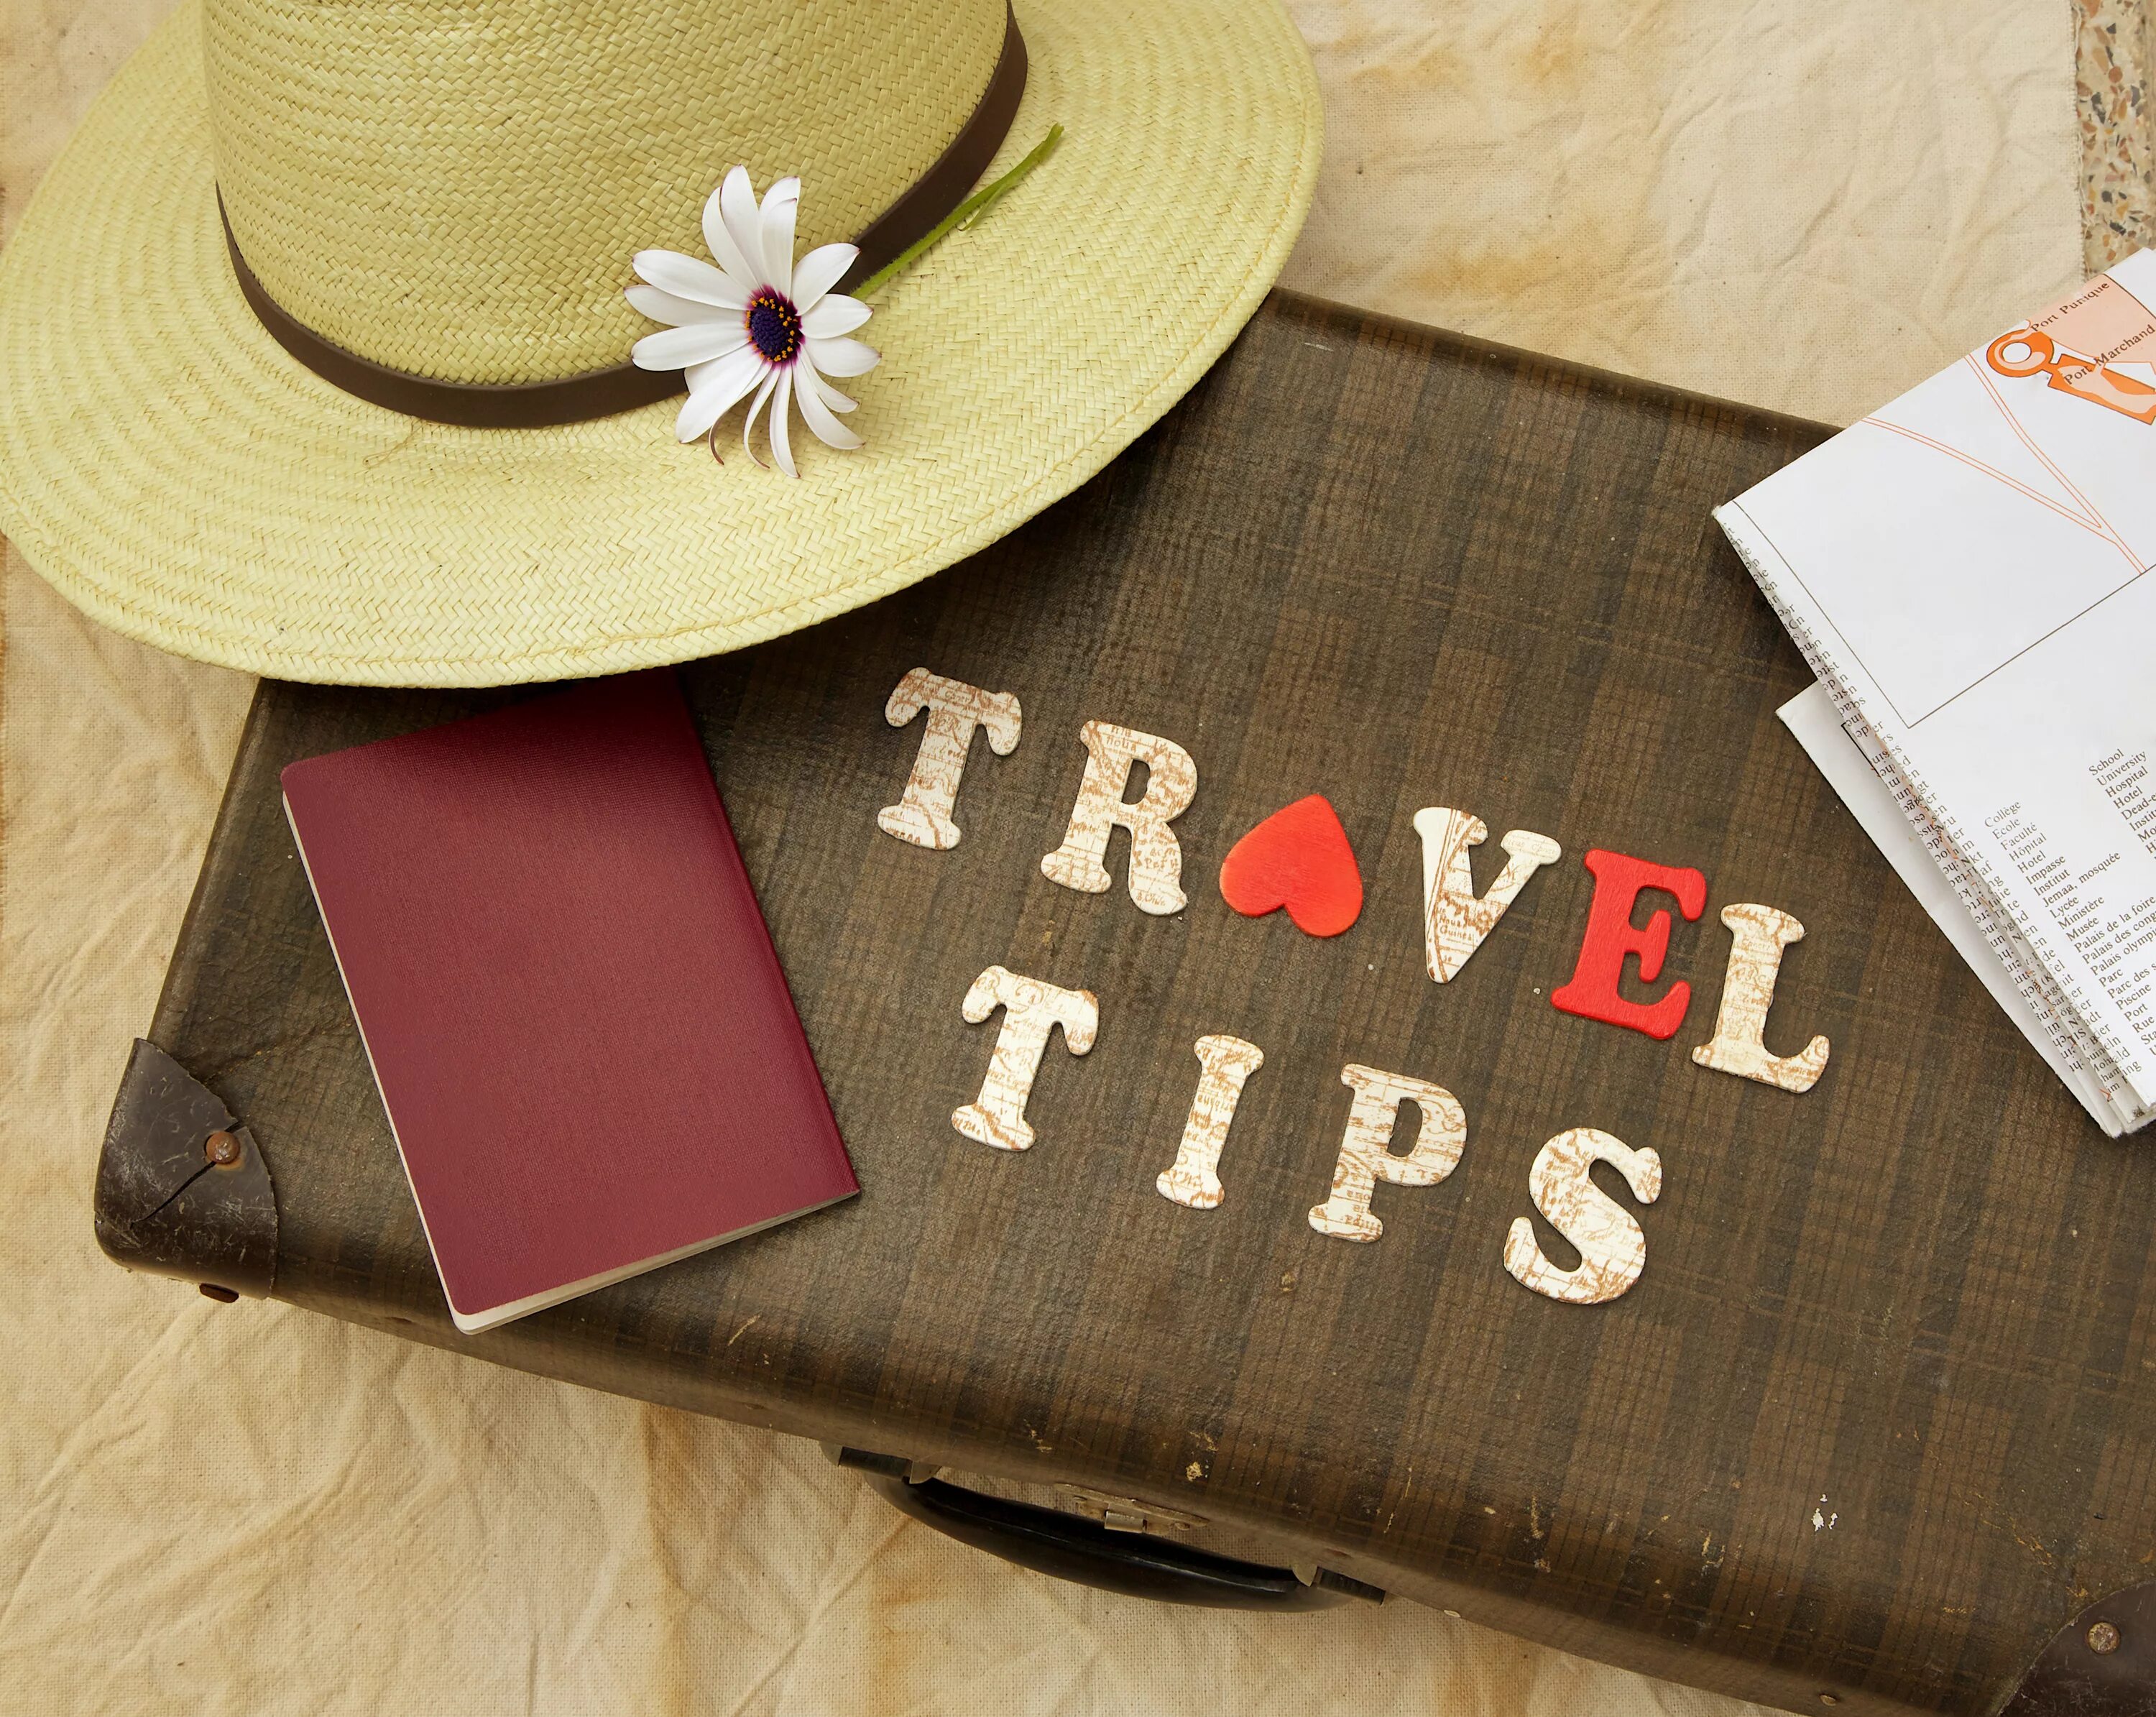 Travel Tips. Travelling Tips. Travellers‘ Tips. Tips for Tourists. How was your traveling